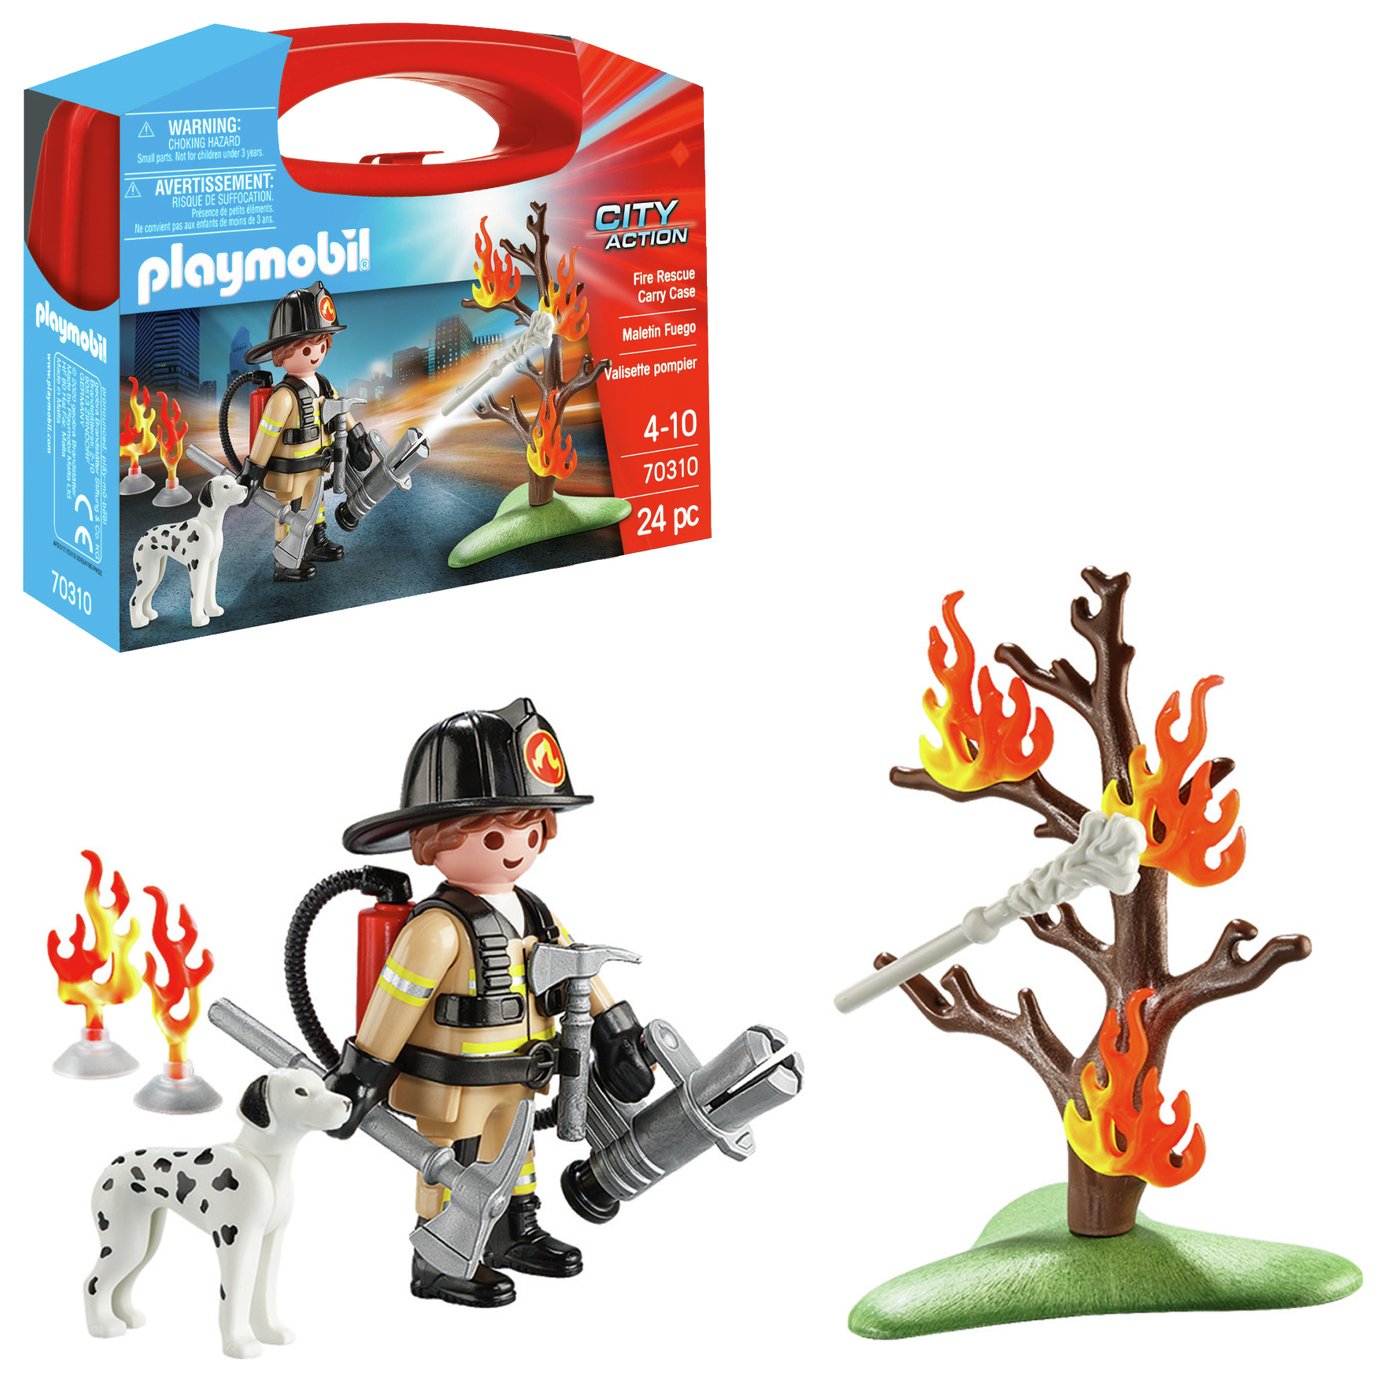 Playmobil 70310 City Action Fire Rescue Small Carry Case